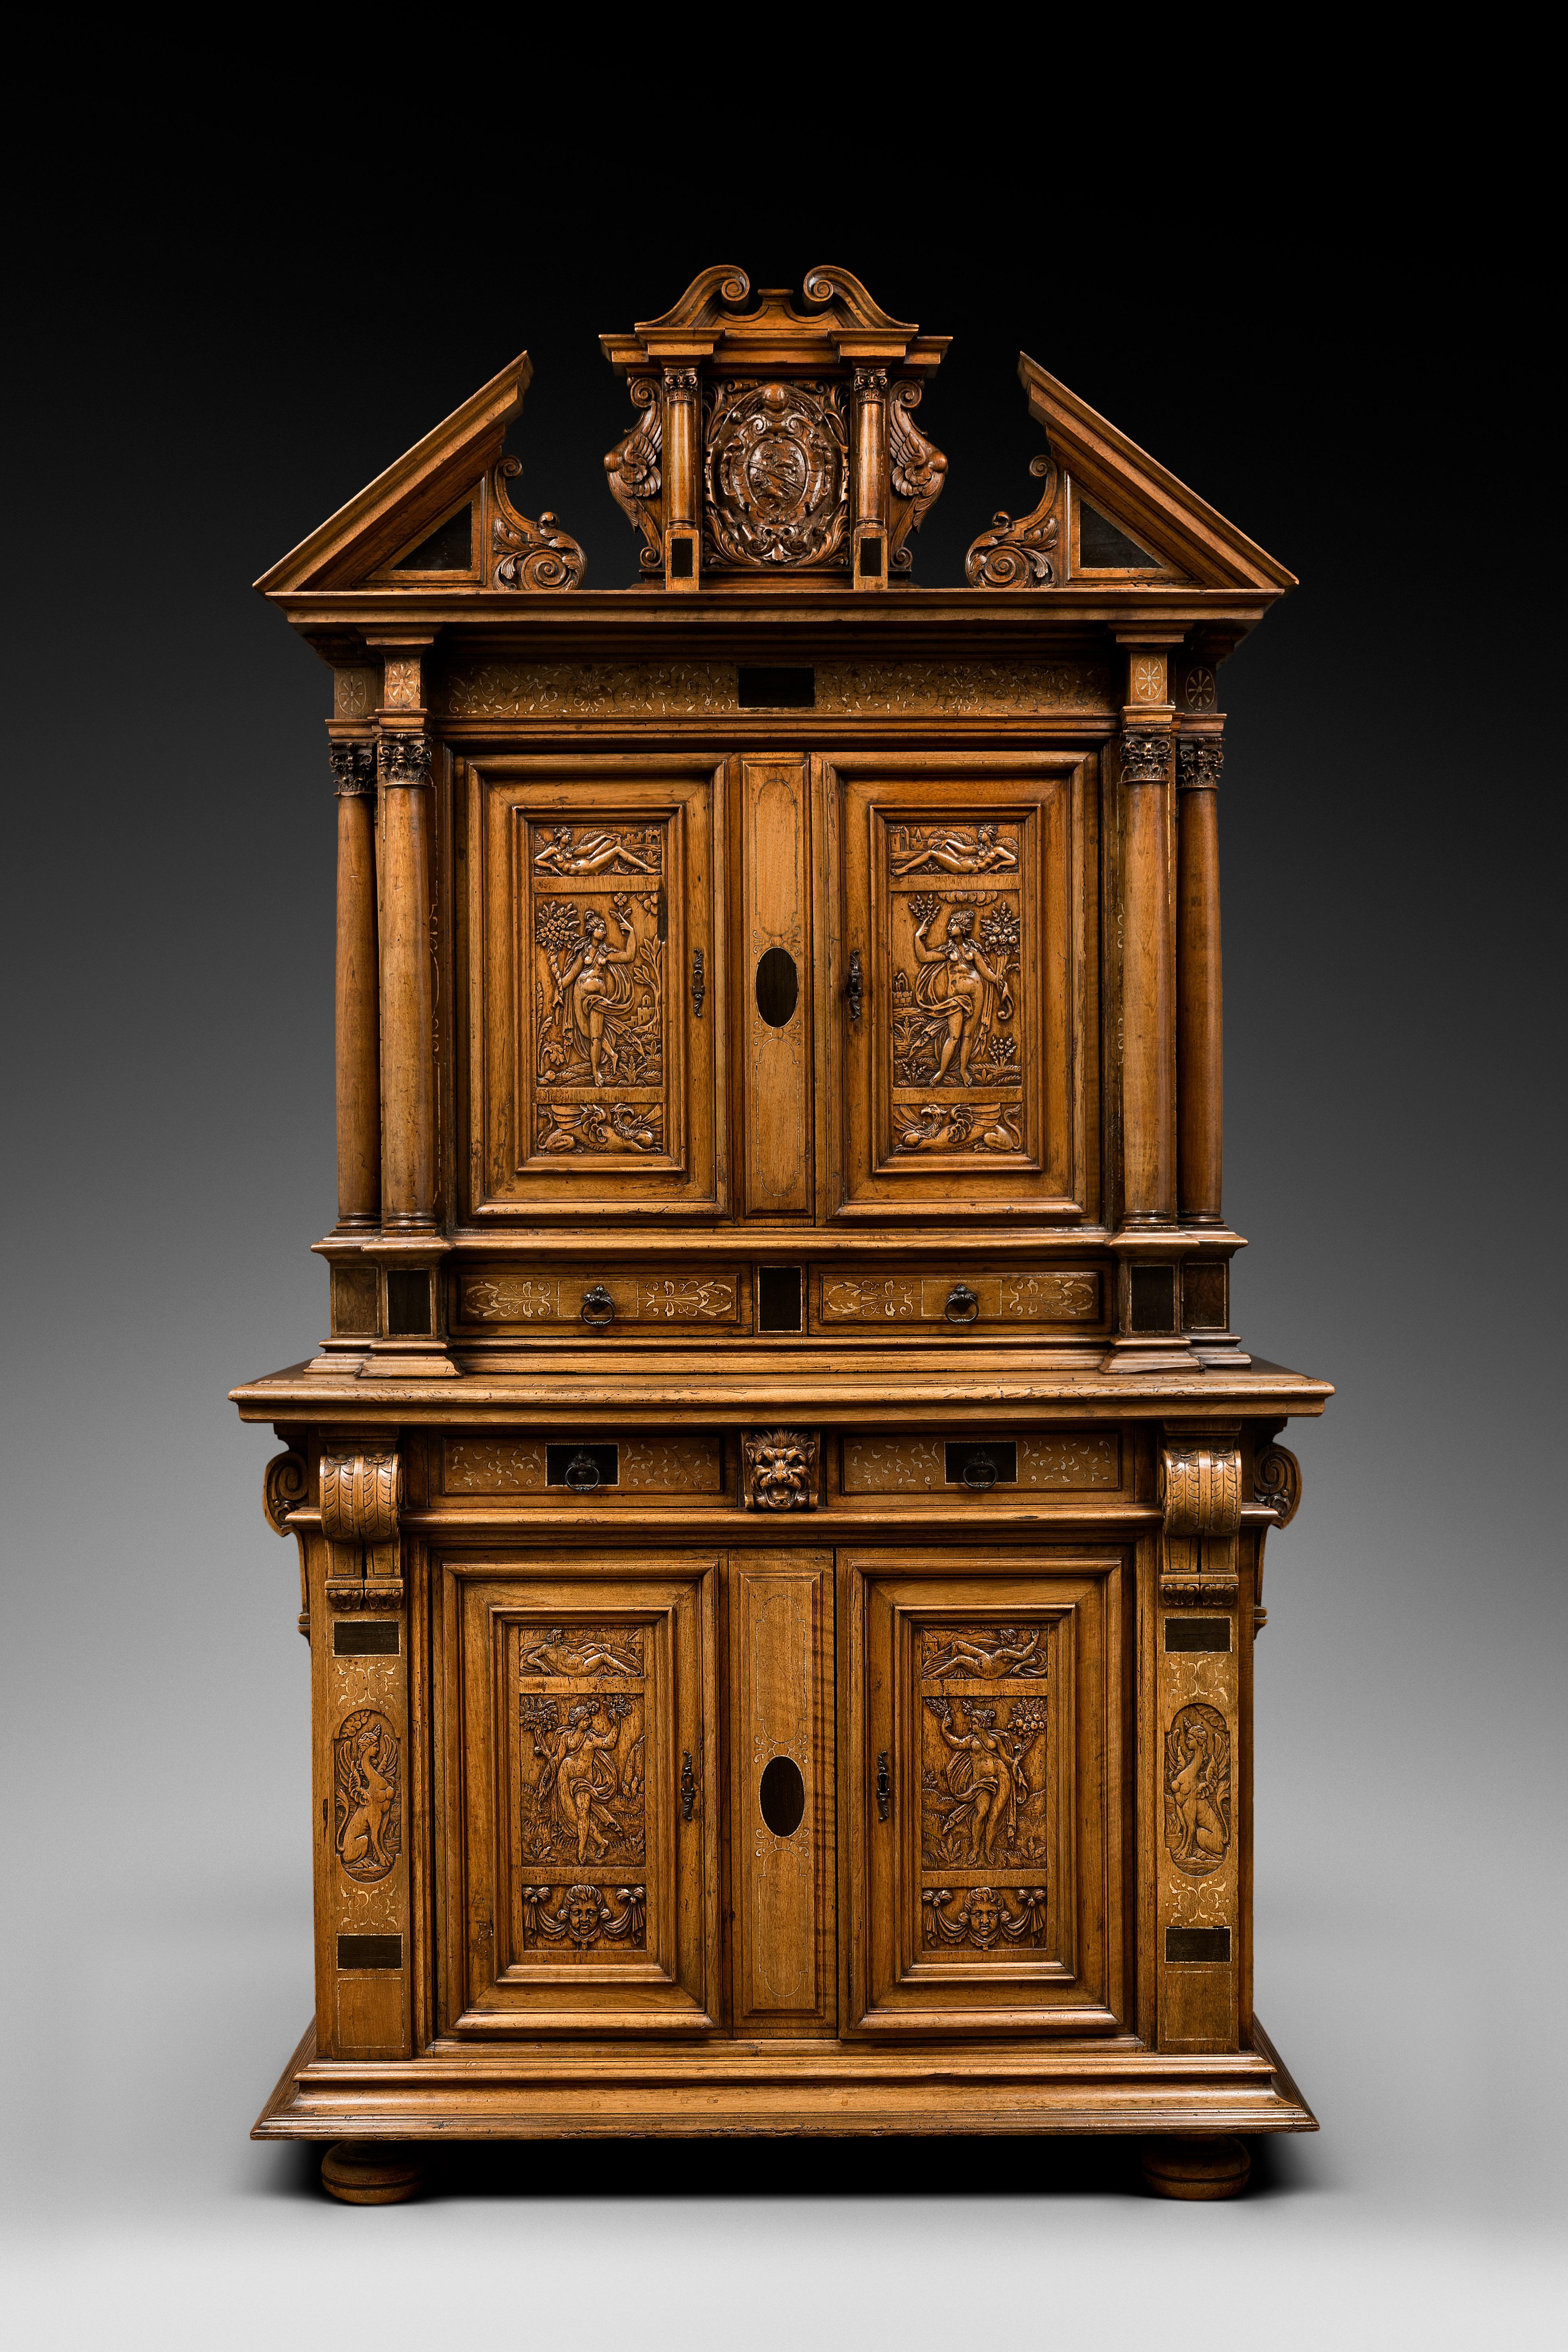 Fontainebleau renaissance cabinet bearing the Dodieu’s family coat-of-arms

Origin : ILe De France, School of Fontainebleau
Period : Second French Renaissance, Around 1560-1580

Light coloured walnut wood, egg-shell pastiglia, inlay of